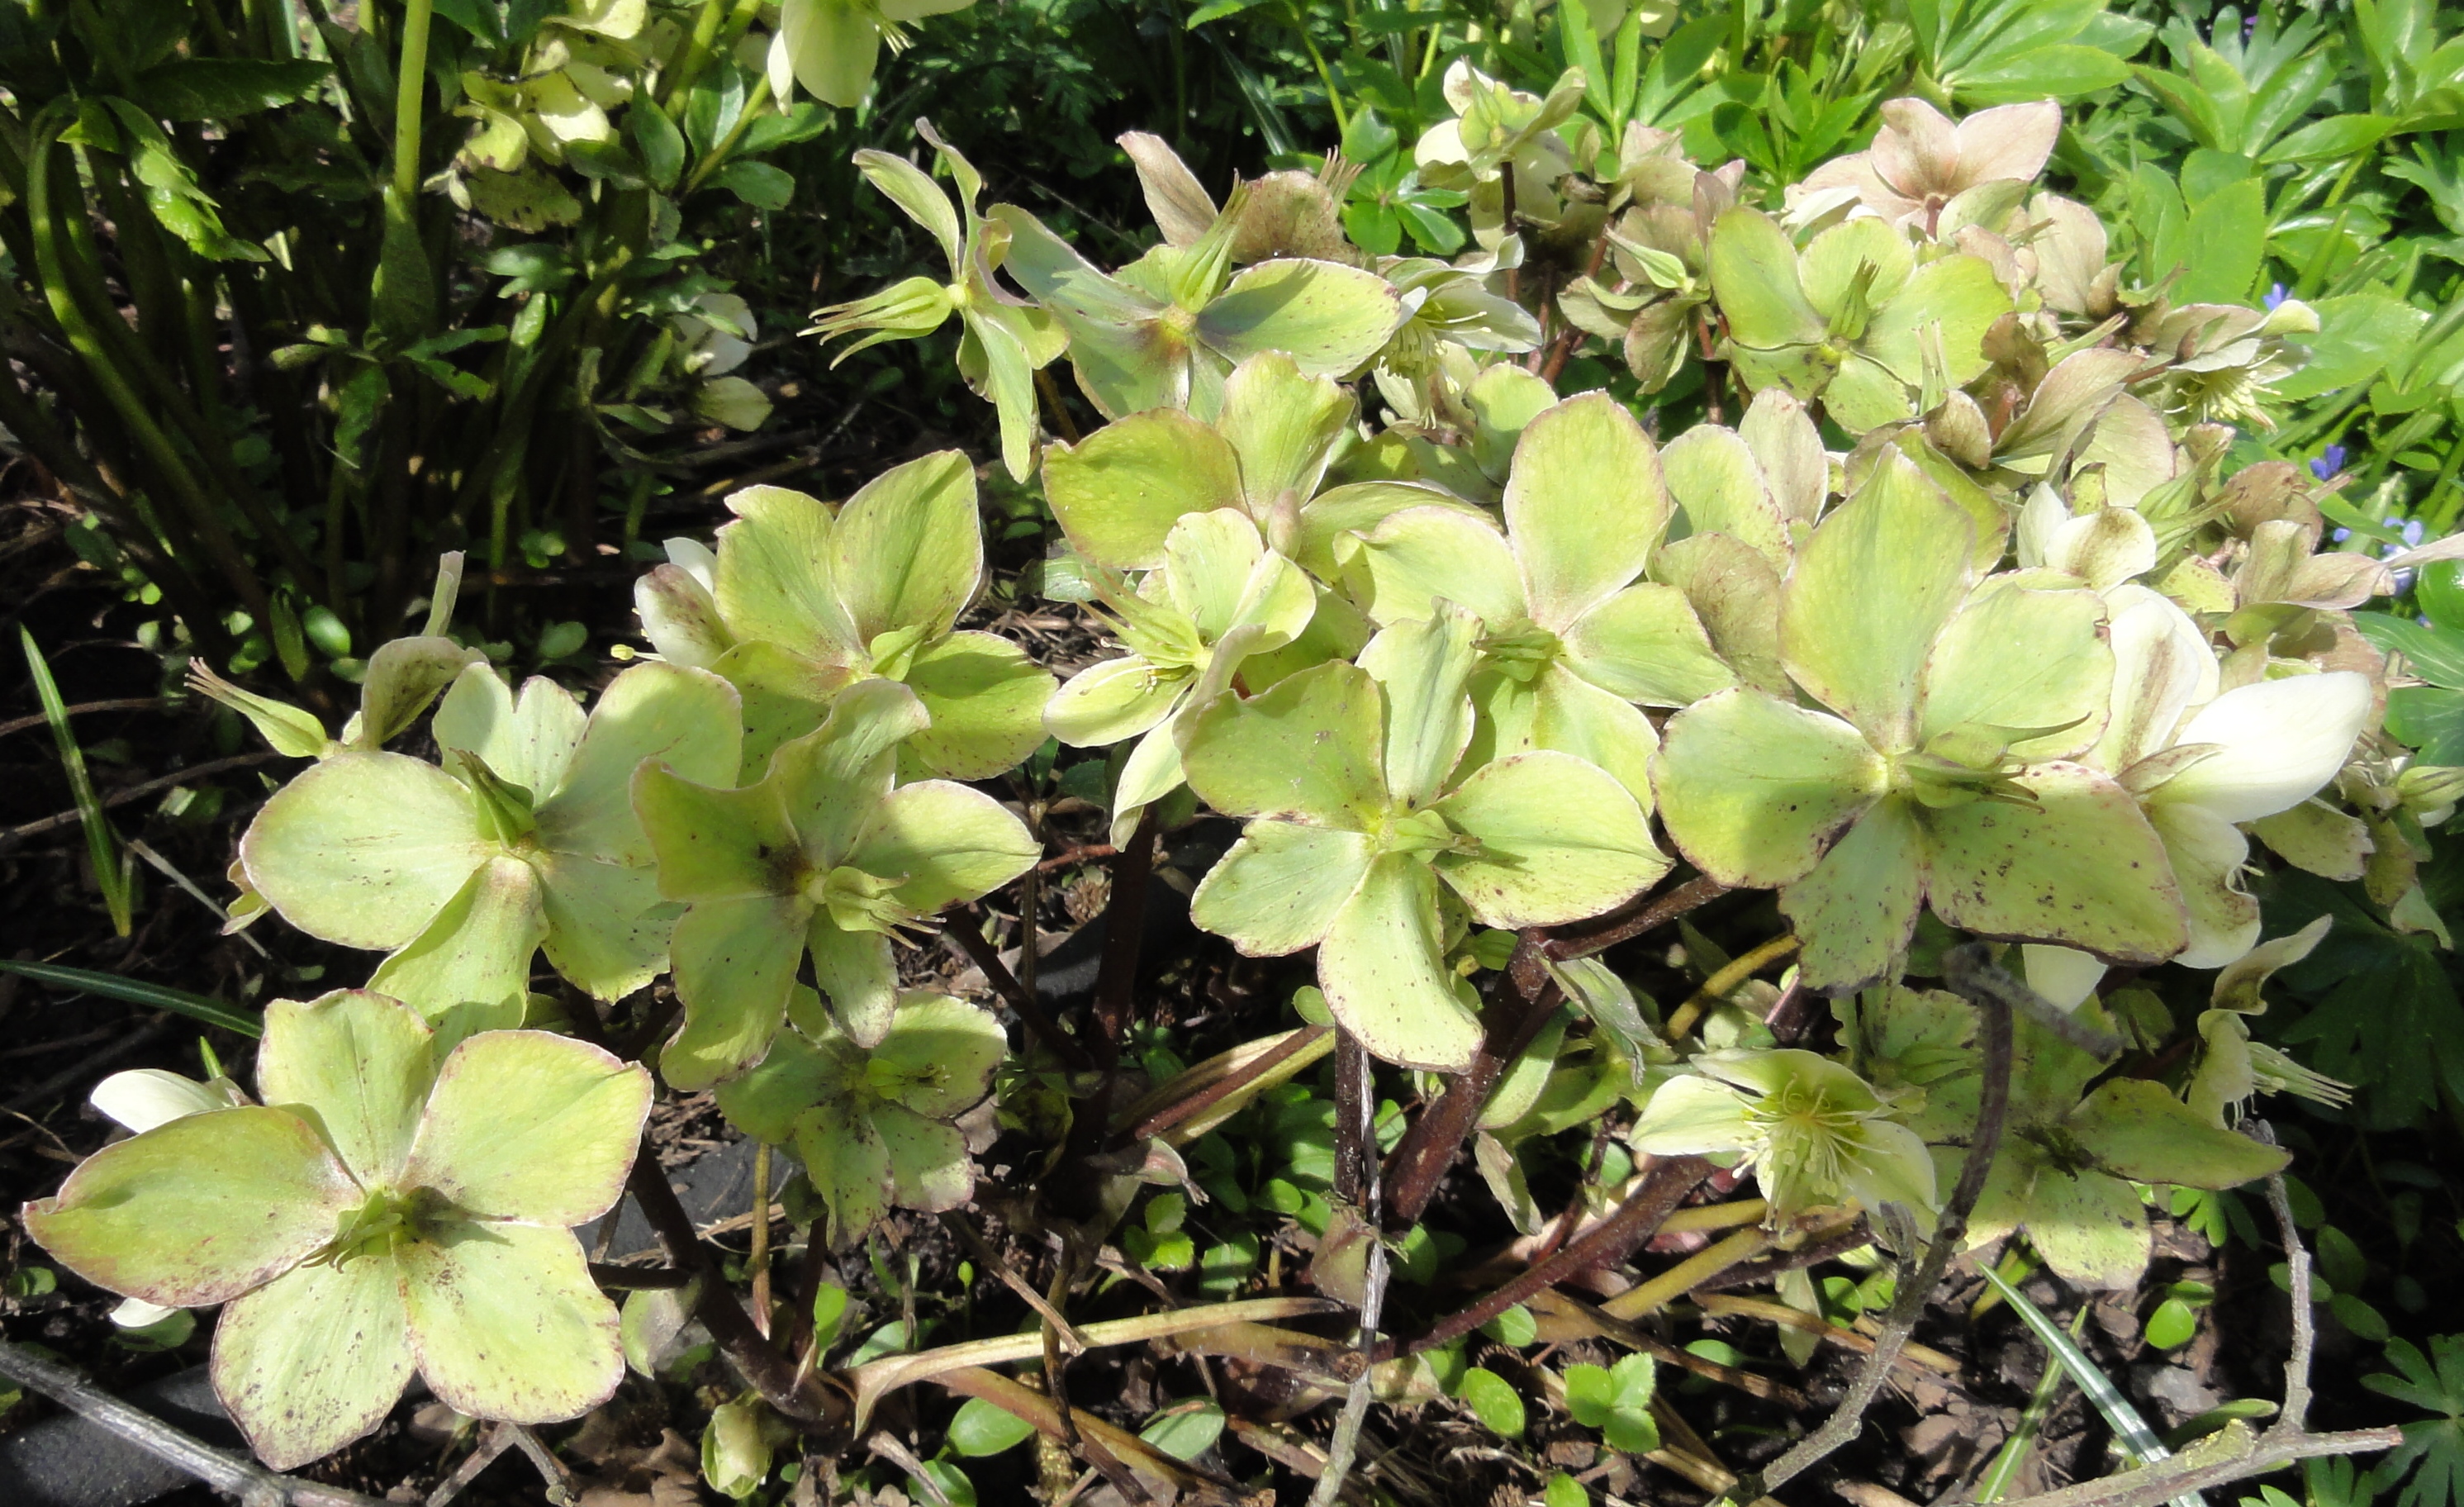 Image shows several of the flowers growing together. They are a pale green.